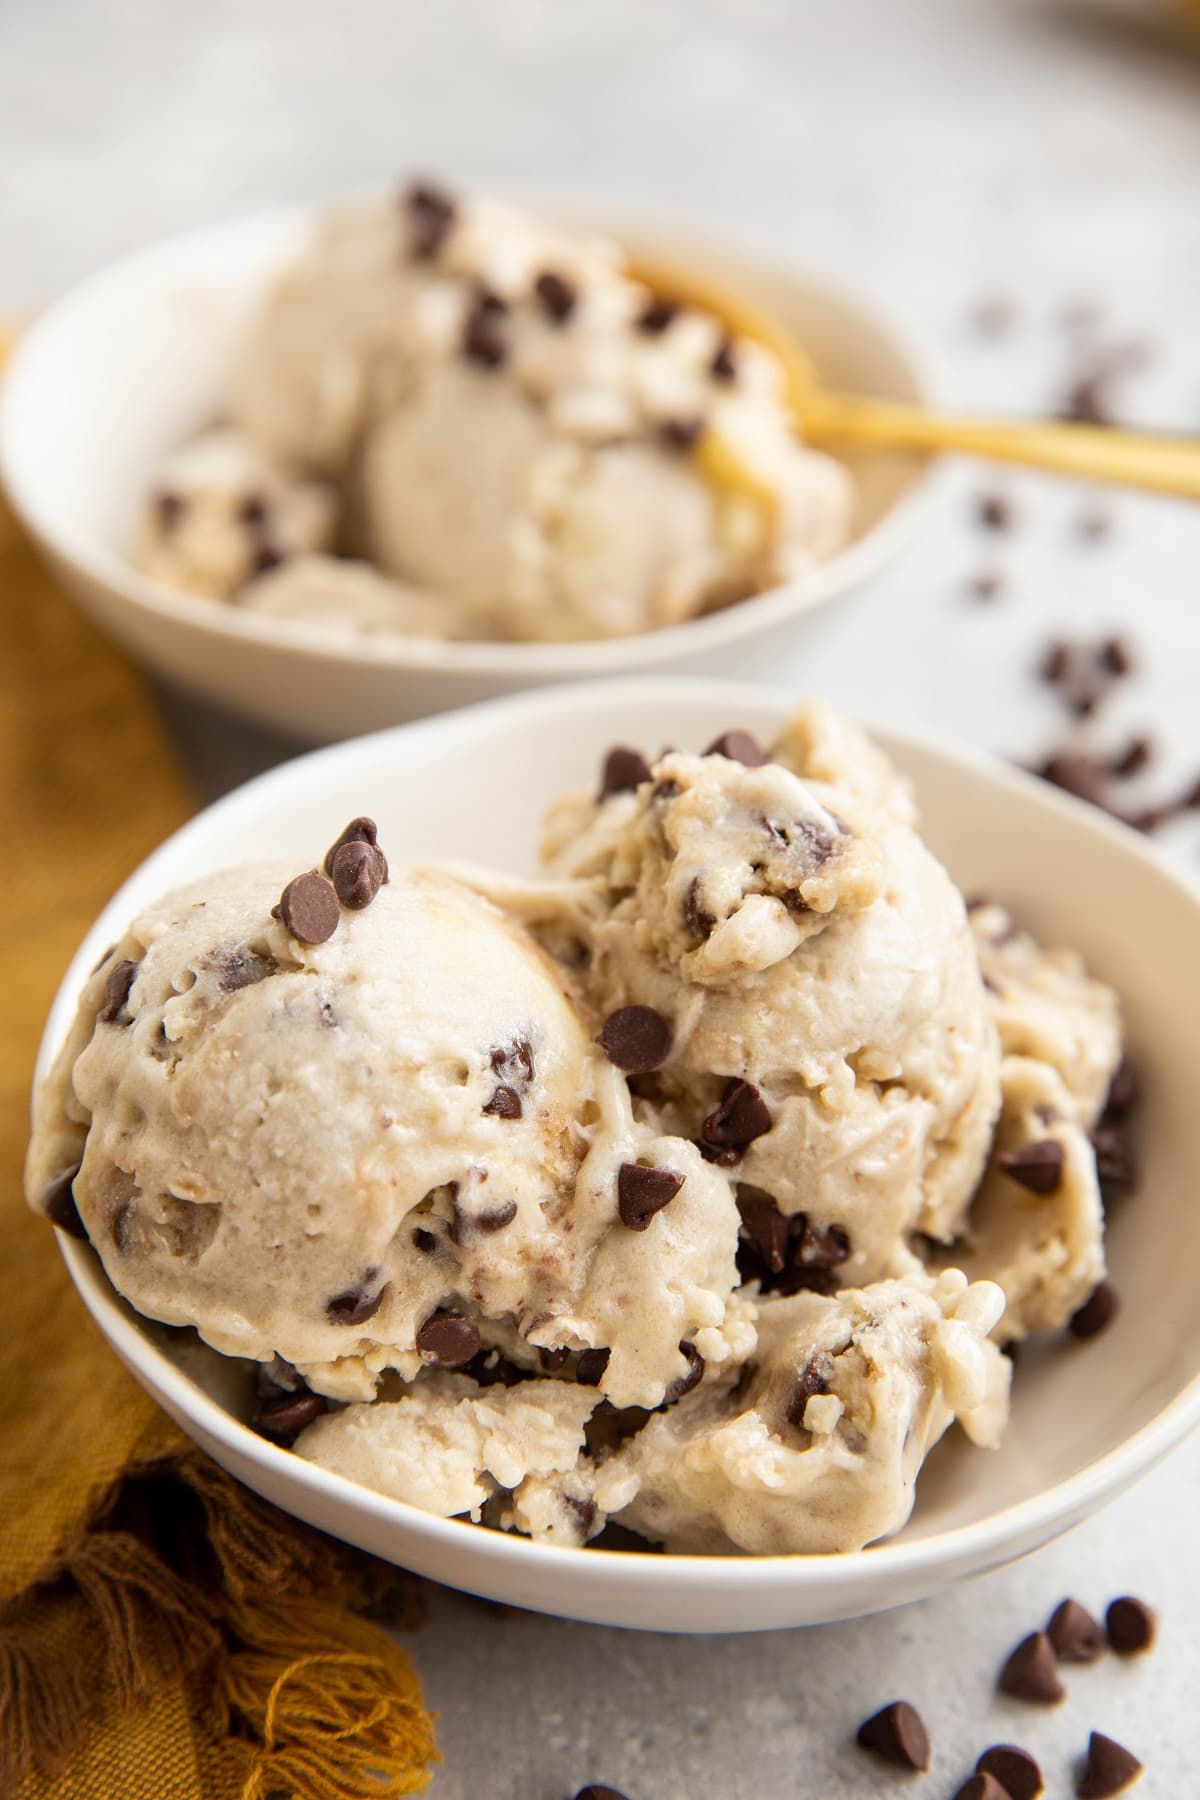 Easy Homemade Ice Cream Recipe - A Pinch of Healthy